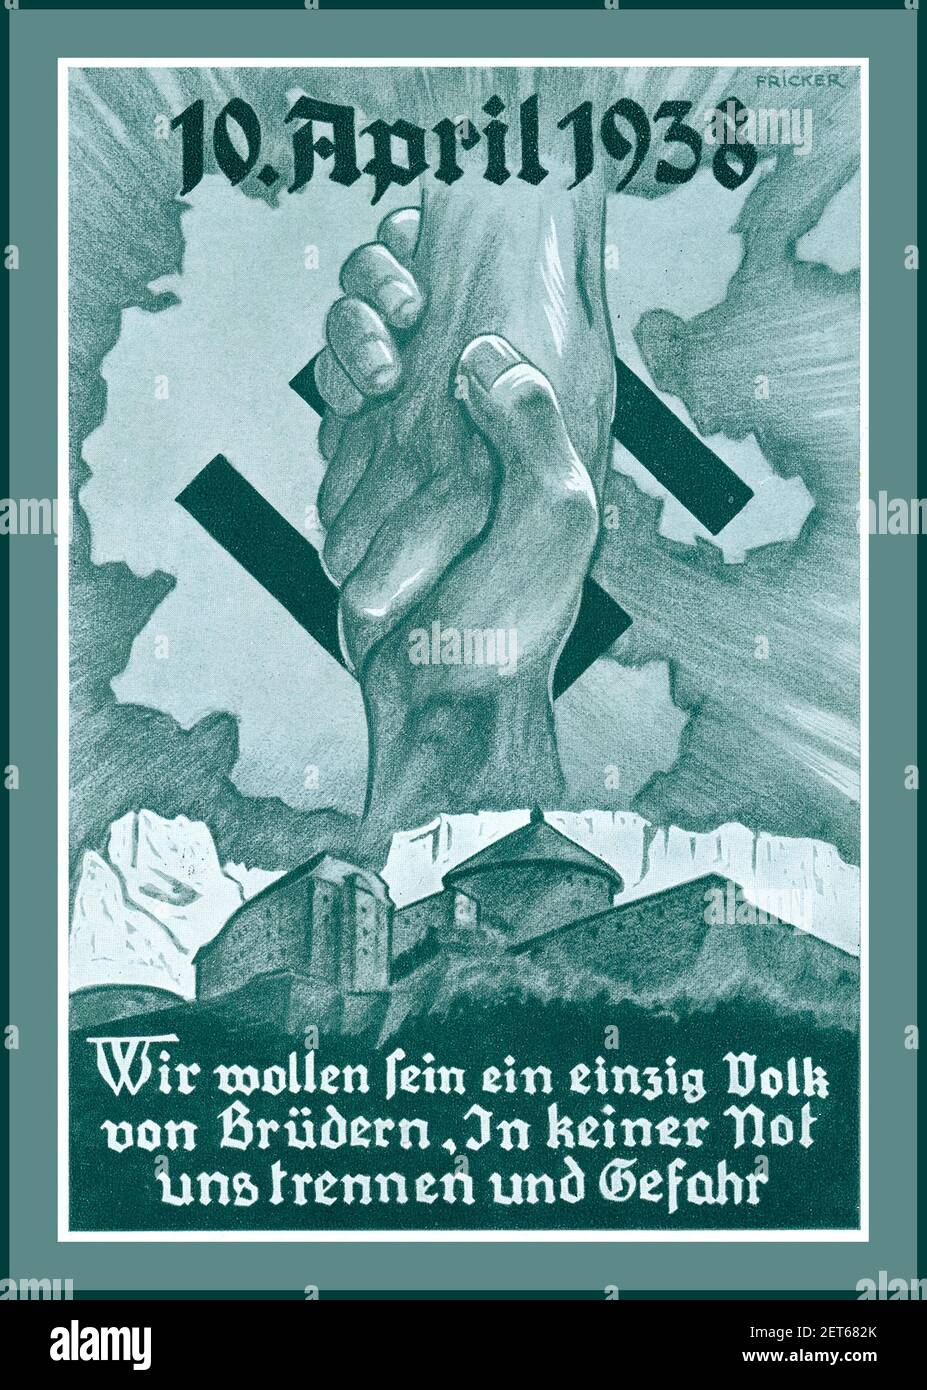 Anschluss 1930’s Vintage Poster (Austria)  Nazi Parliamentary Election and Referendum Anschluss (Austria) 10th April 1938 Nazi Propagnda Poster 'We want to be a single people of brothers with no need to be separate with its risks'  (  Wir wollen sein ein einzig volk von Brudern in keiner Not uns trennen und gefahr ) Hands shaking over a Nazi Swastika, with Nurnberg Castle behind Nazi Germany by Artist Fricker Stock Photo